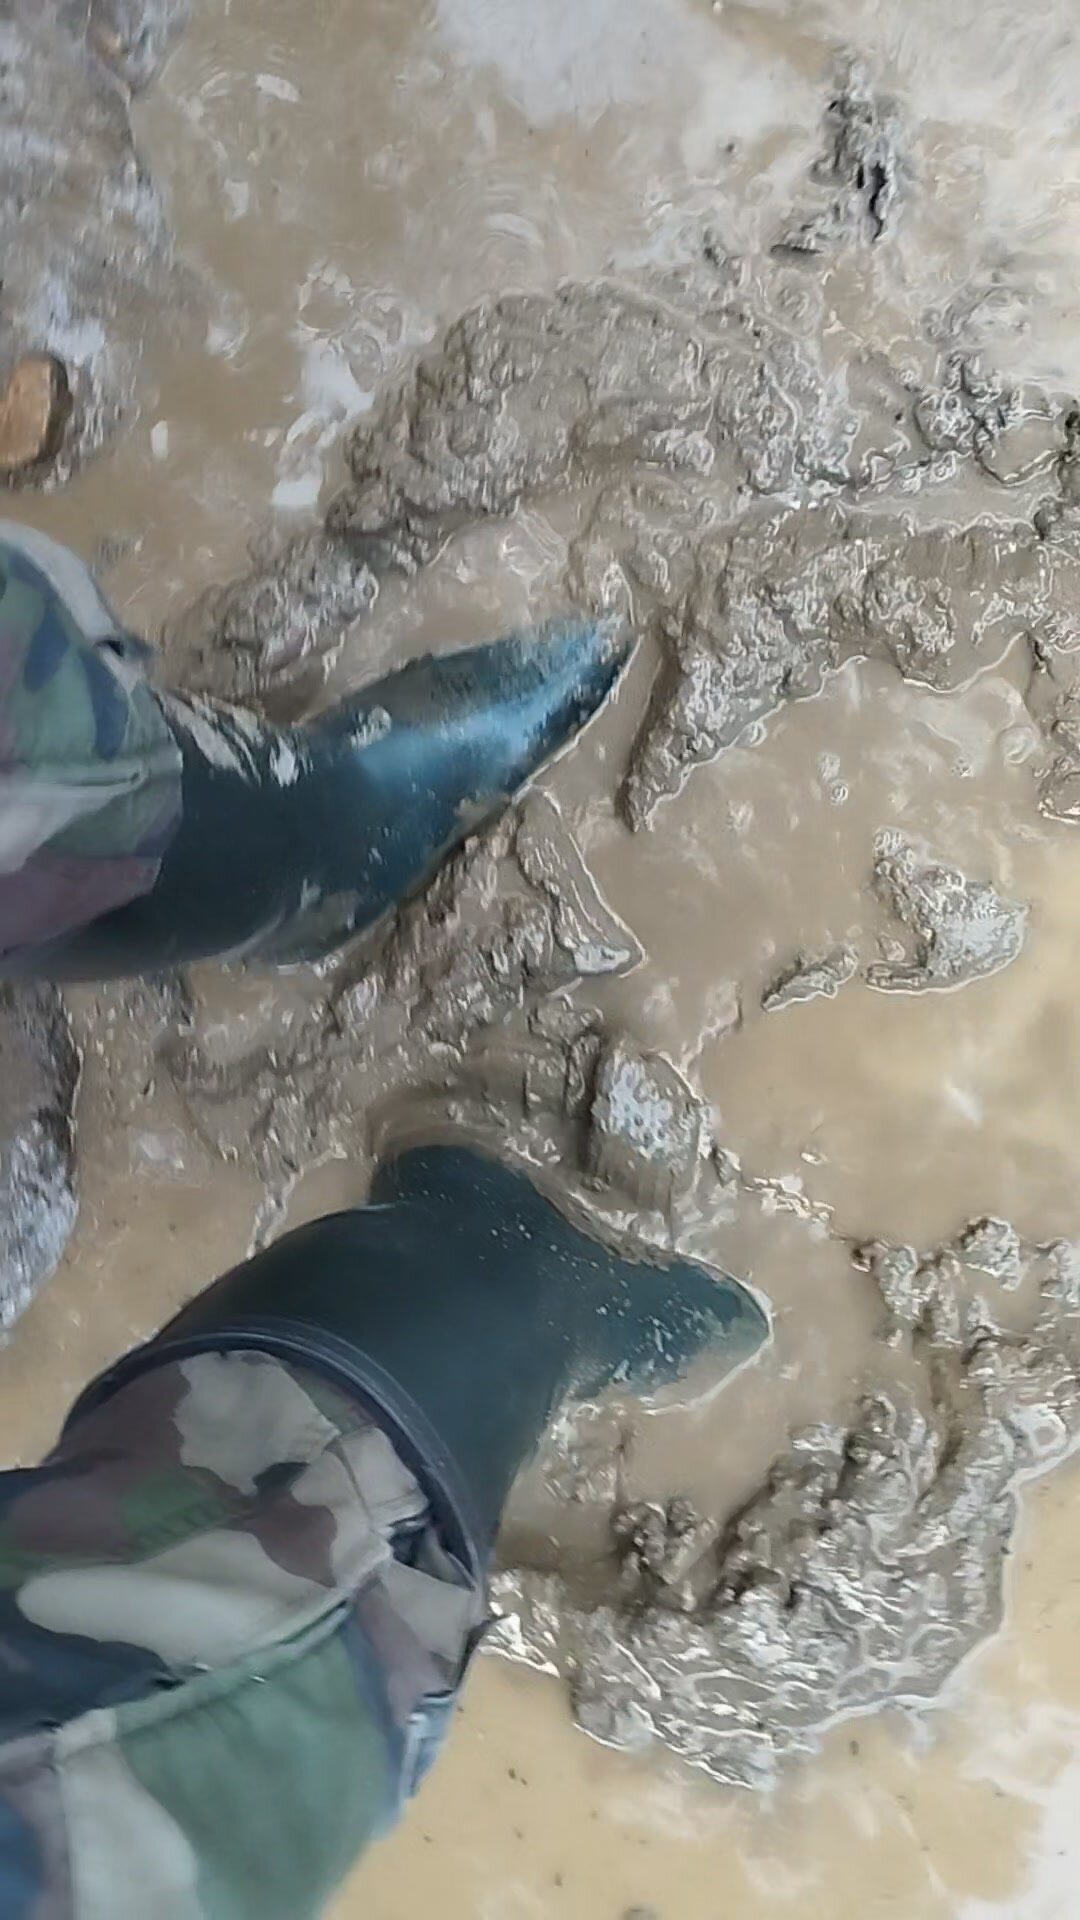 Mud play with Aigle rubber boots